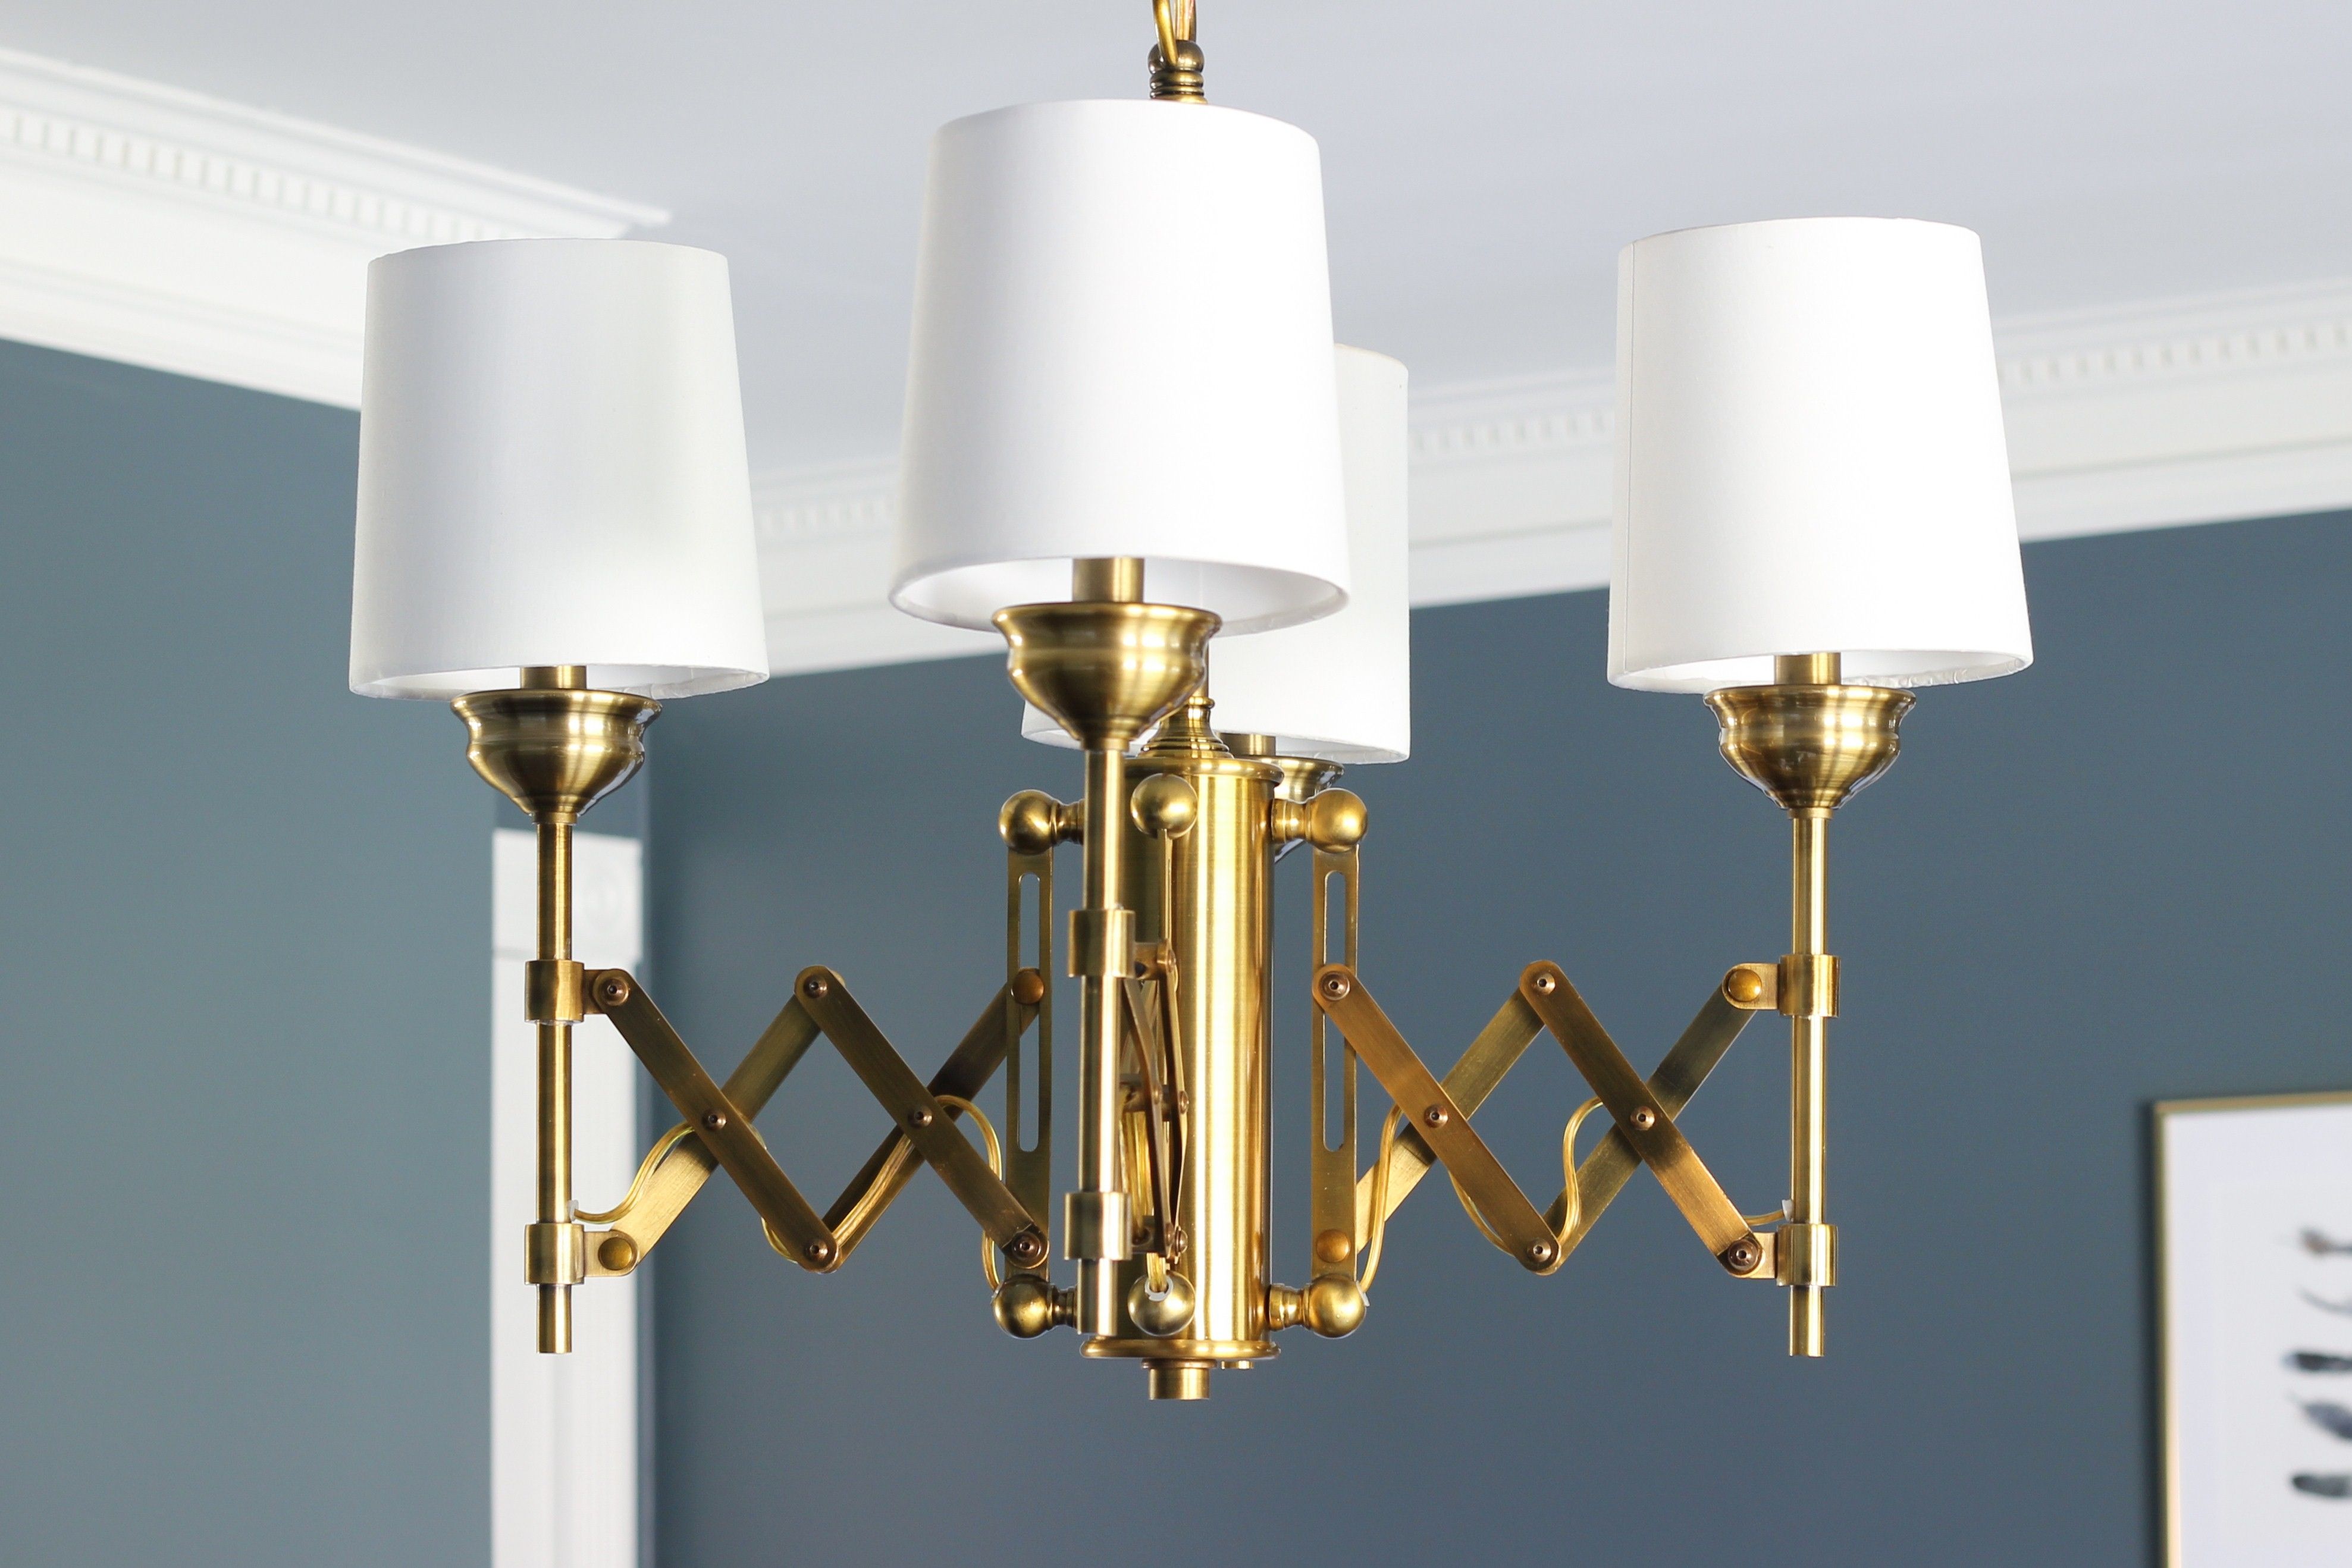 Lighting Bathroom Wall Sconces Bathroom Lighting Sconces Outdoor Intended For Bathroom Lighting With Matching Chandeliers (View 18 of 25)